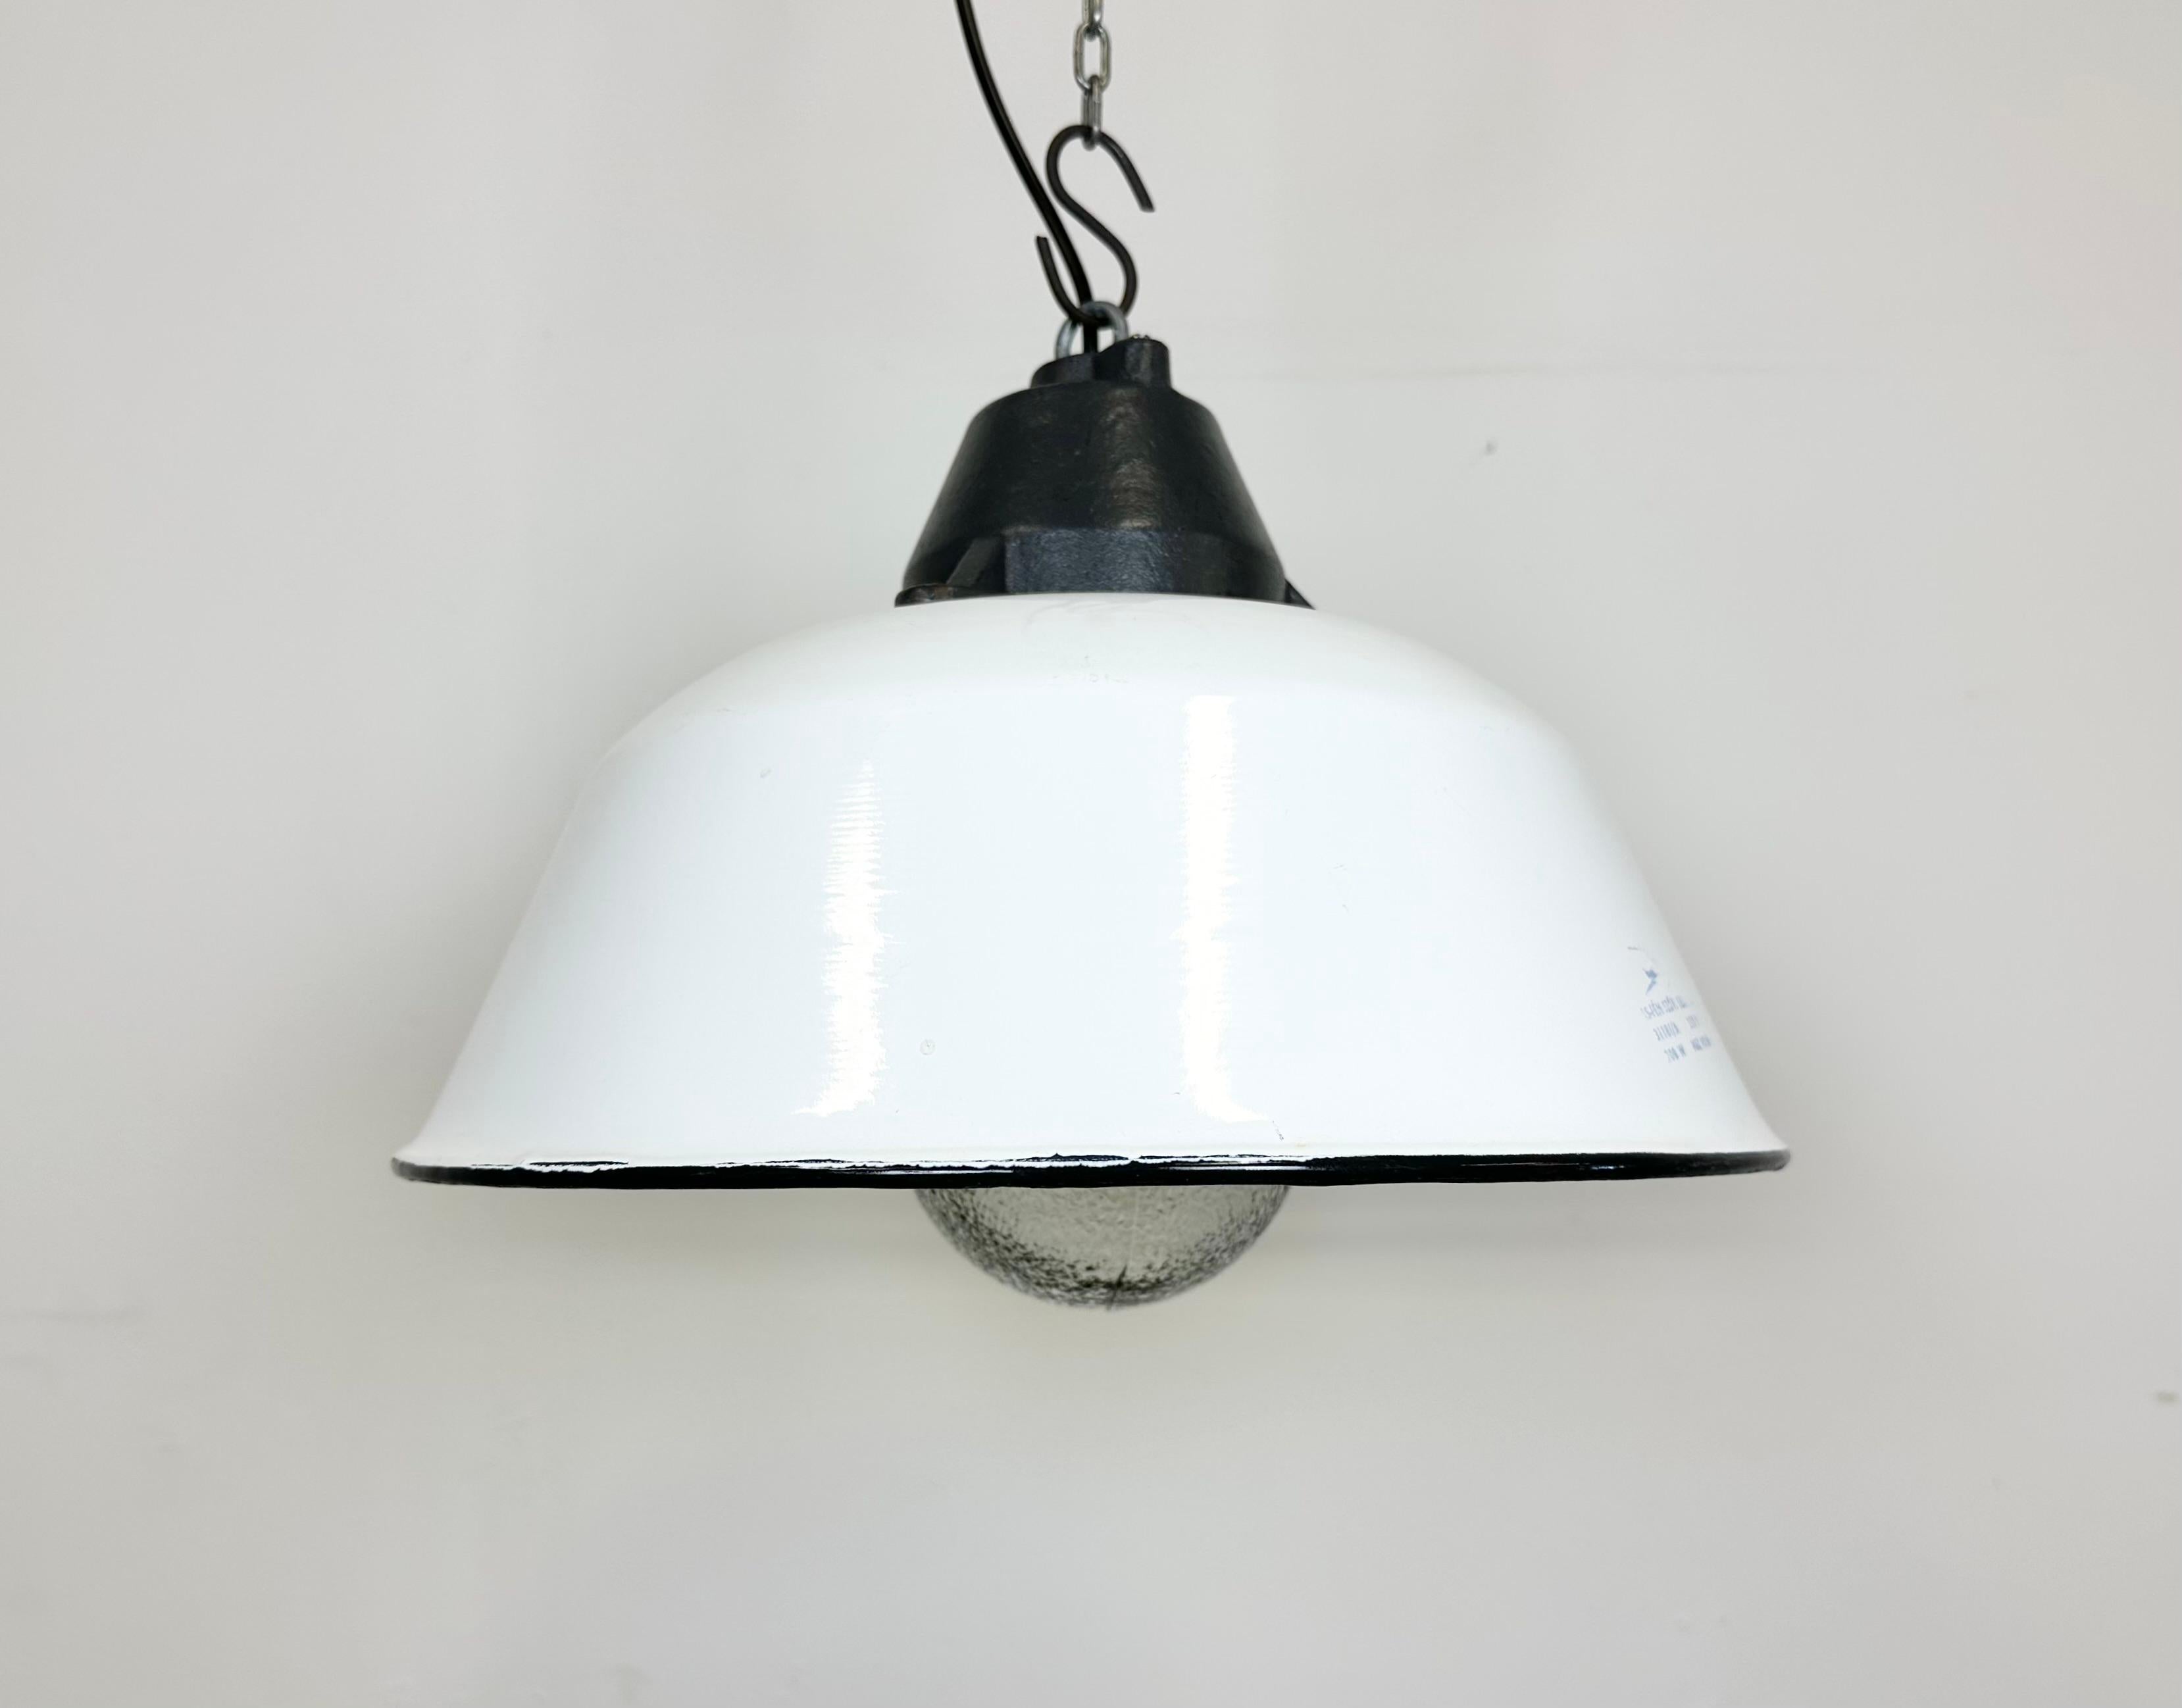 Industrial hanging lamp manufactured by Szarvasi Vas - Fém in Hungary during the 1960s. It features a white enamel shade, a white enamel interior, a grey cast iron top and a frosted glass cover New porcelain socket requires E 27 light bulbs. New